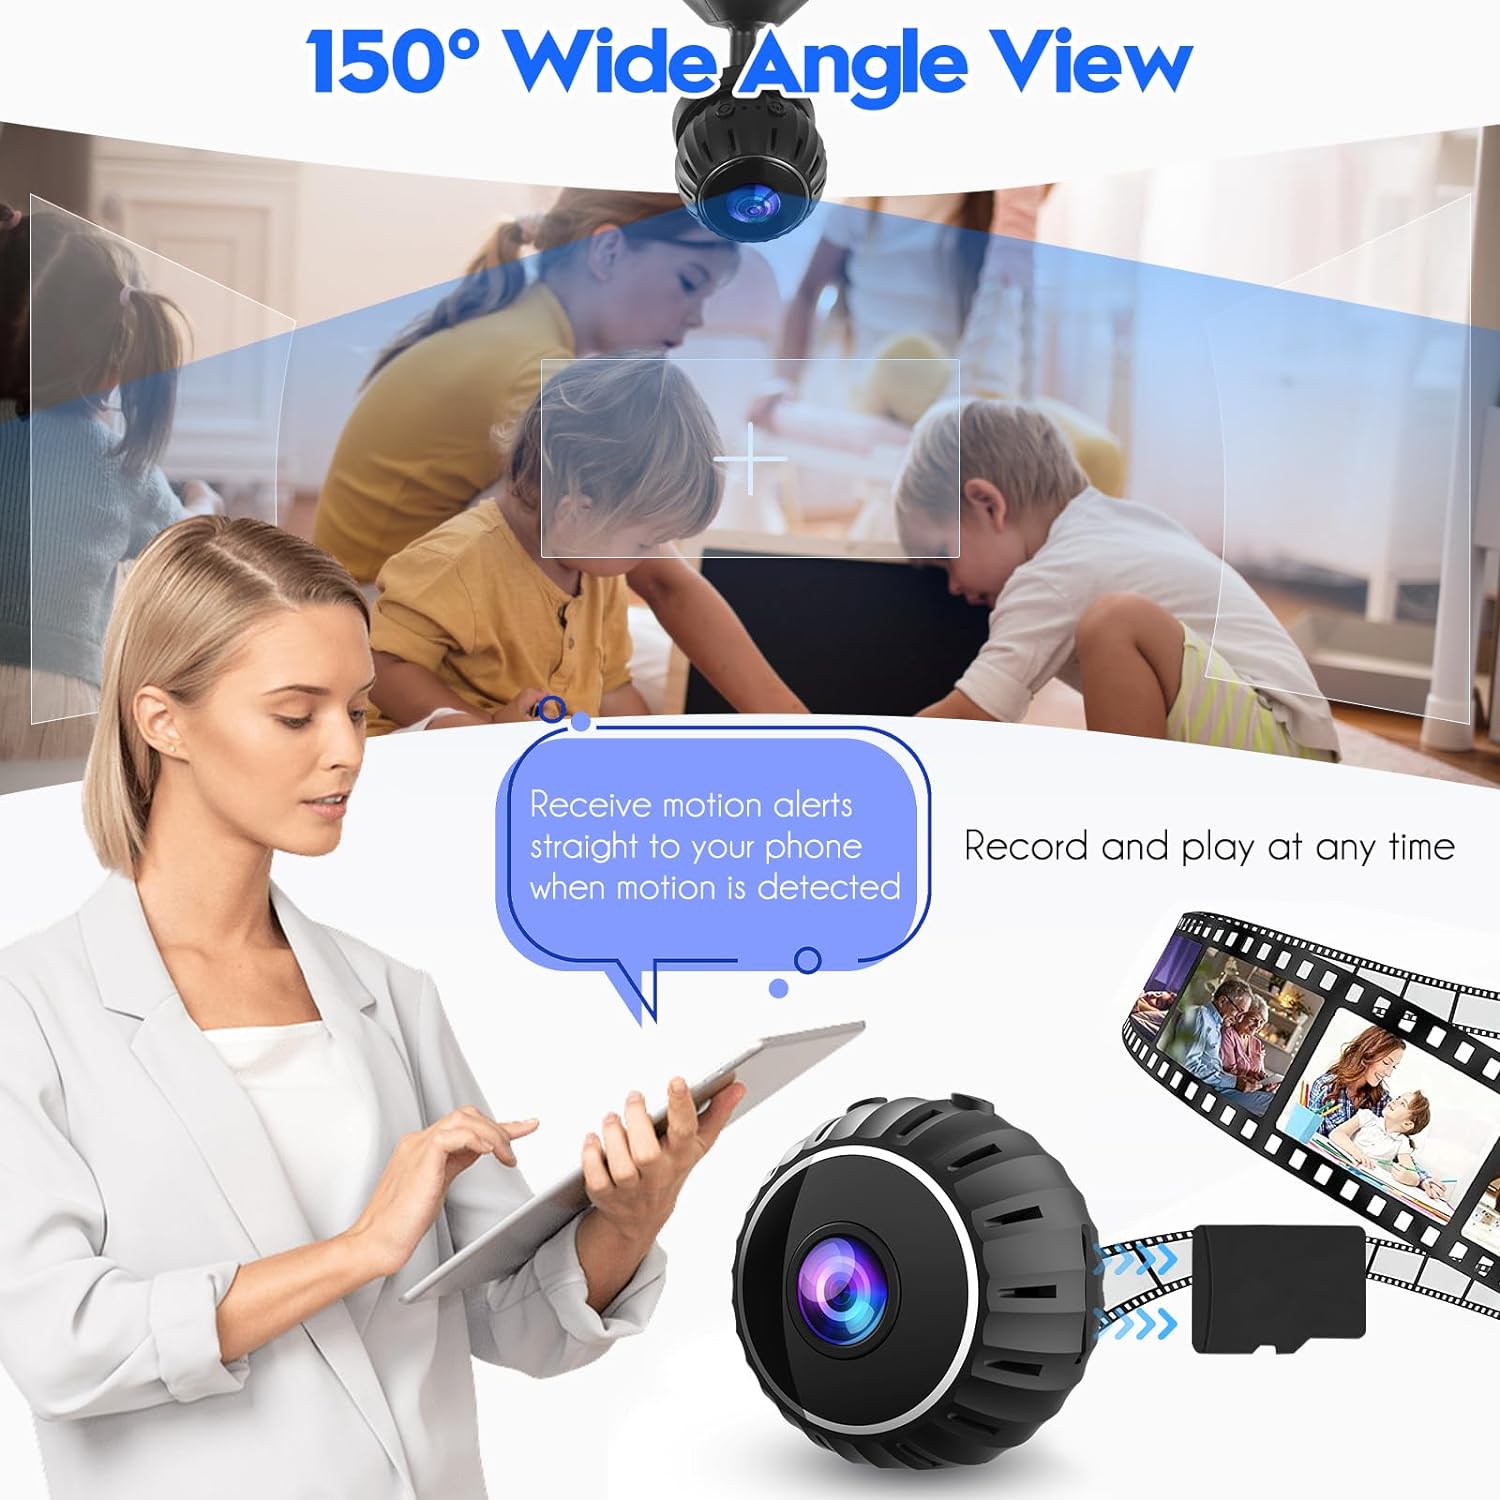 Security-Cameras-Mini-Camera-for-Home-Security-1080p-HD-Mini-IR-Camera-WiFi-Wireless-Small-Indoor-Nanny-Camera-Cell-Phone-APP-Control-with-A-Wide-Angle-Remote-View-17